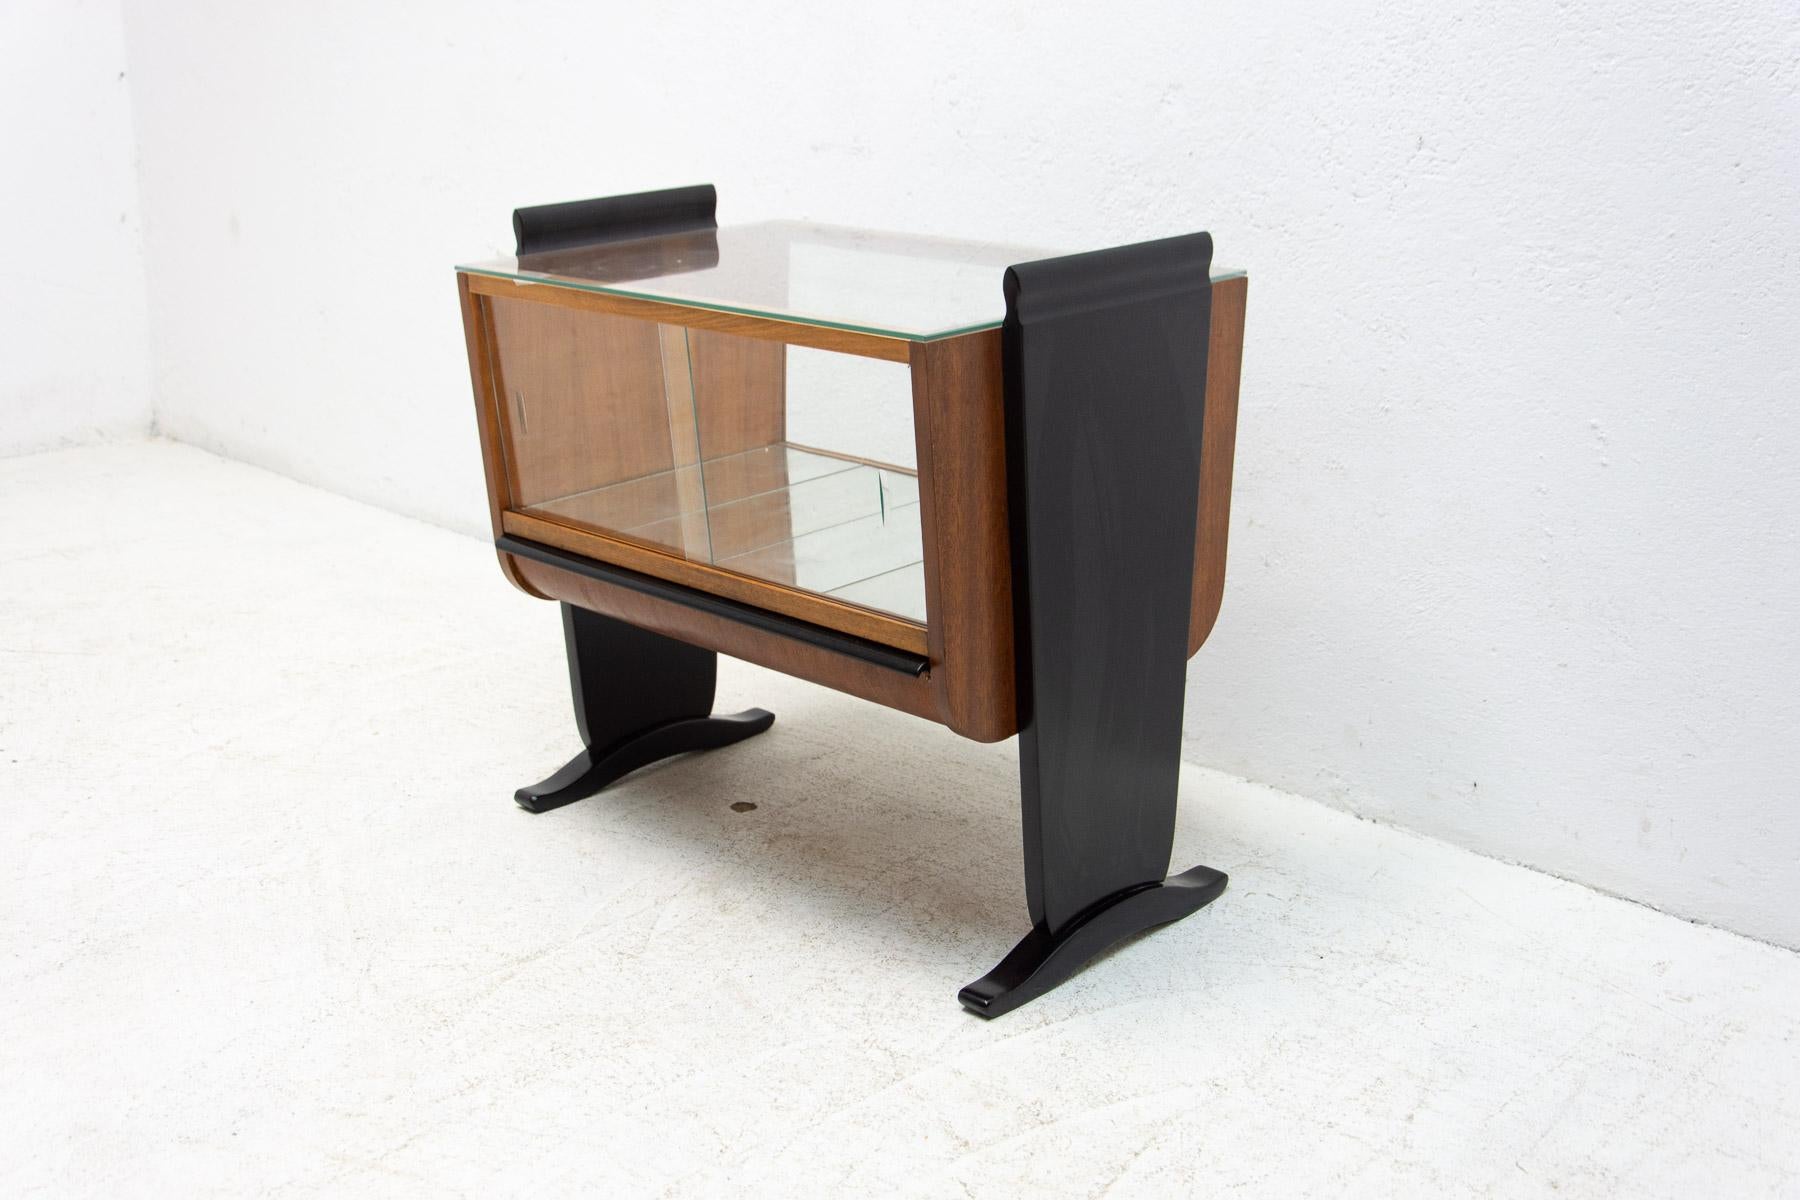  Luxury Glazed Art Deco Drinks Cabinet by Jindrich Halabala In Excellent Condition For Sale In Prague 8, CZ